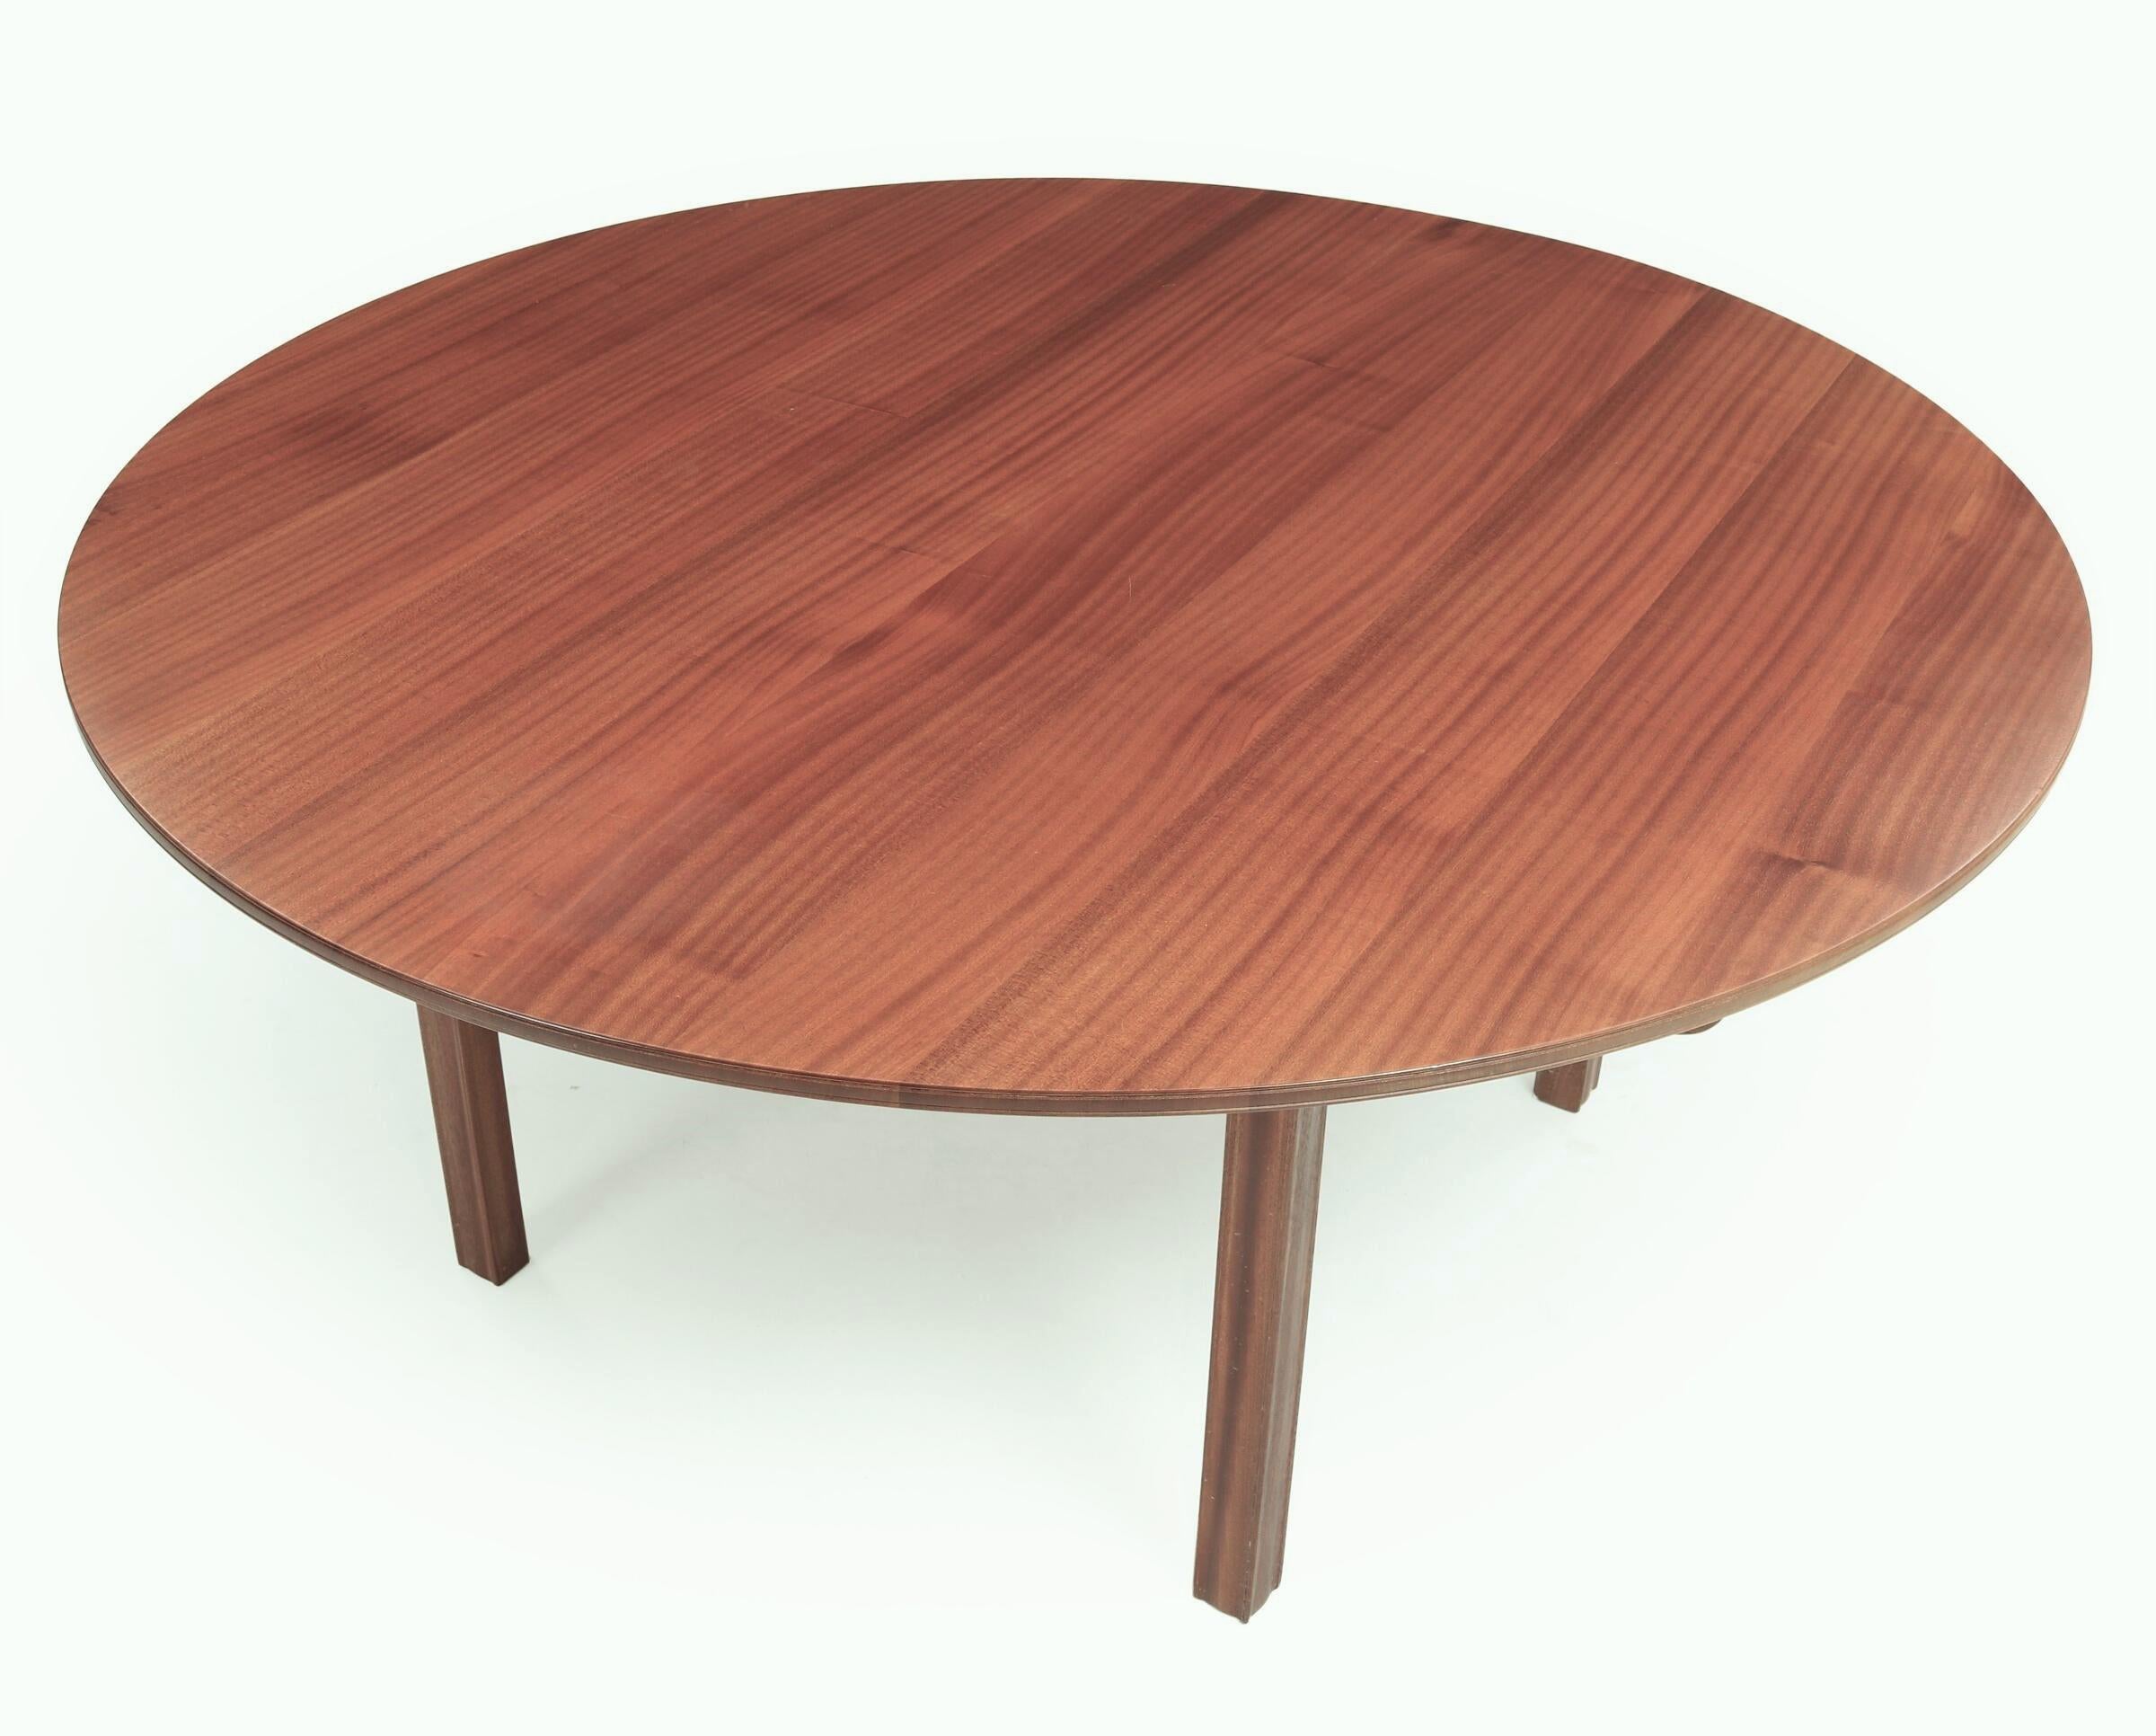 Kaare Klint: A circular solid mahogany dining table with profiled edge and legs. Made and marked by Rud. Rasmussen cabinetmakers. H. 72.5. Diam. 160 cm.